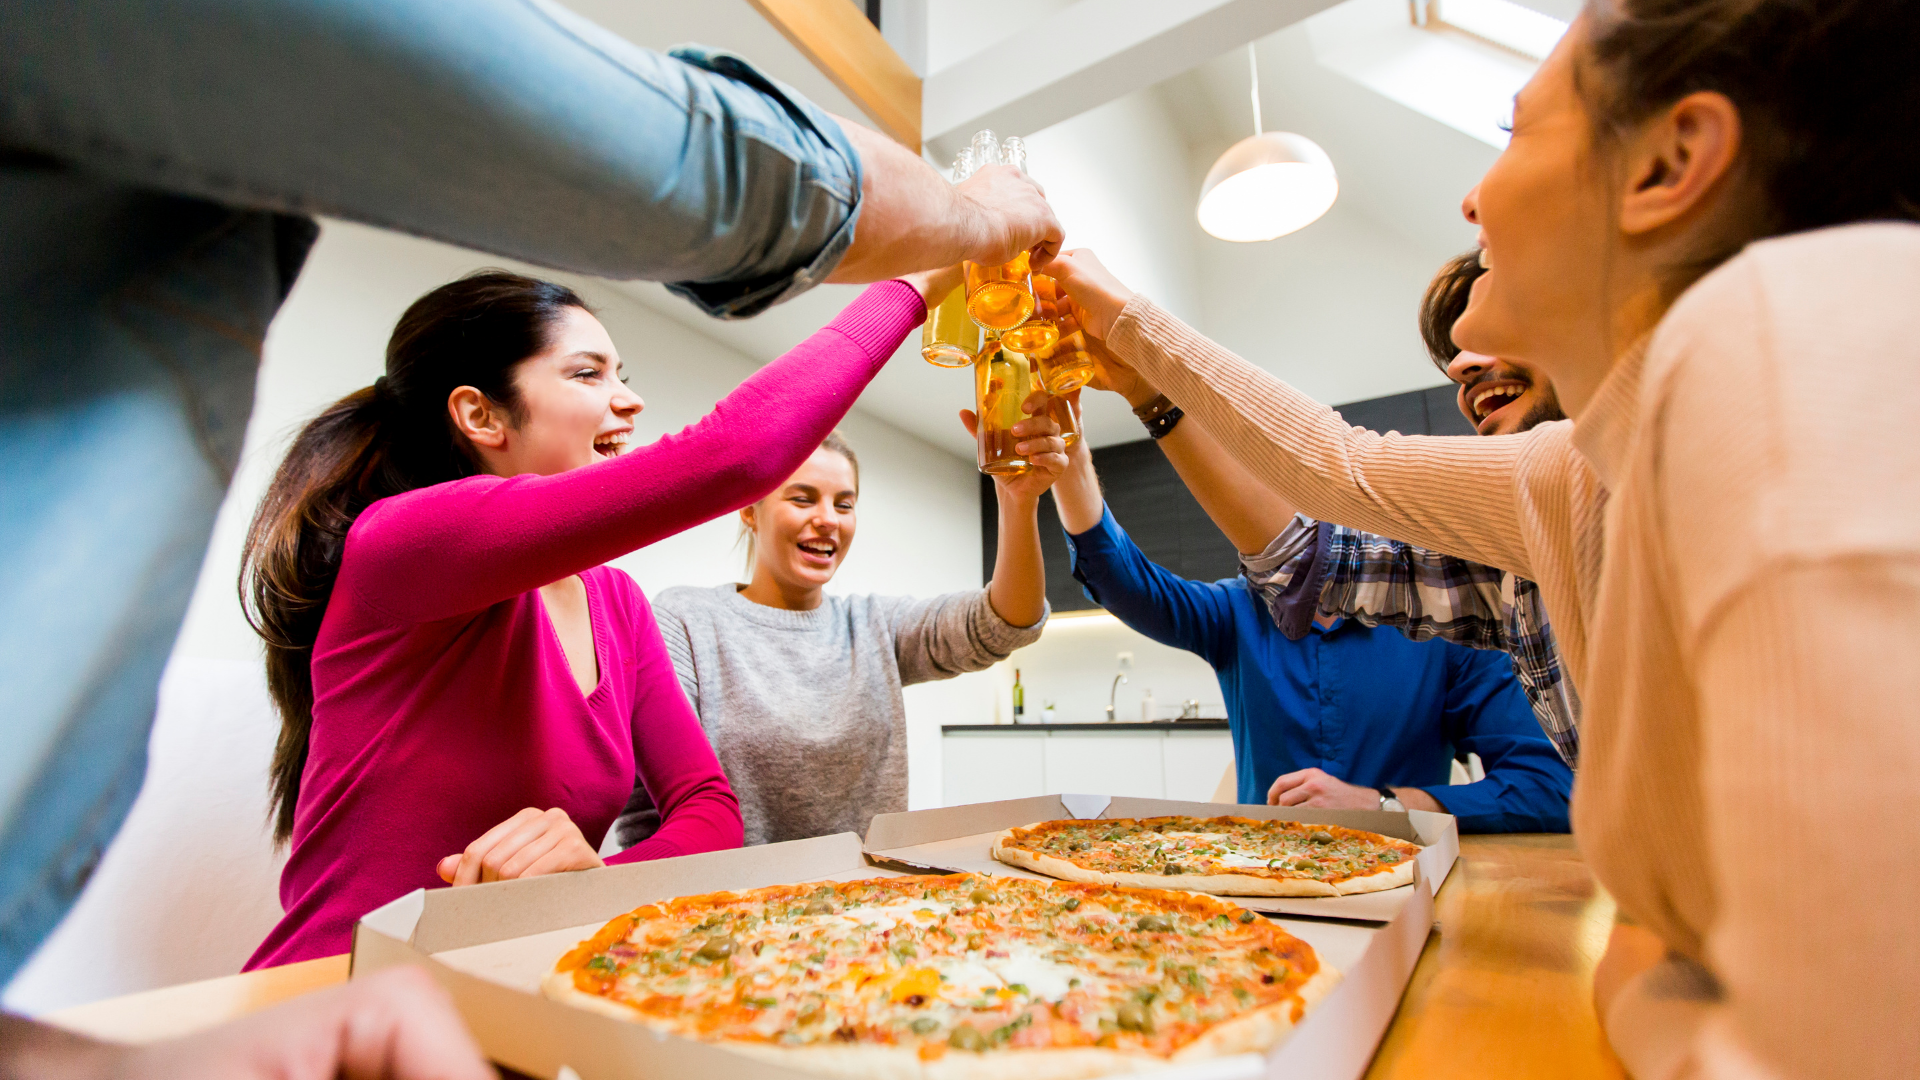 group of young adults toasting with beer glasses over pizzas